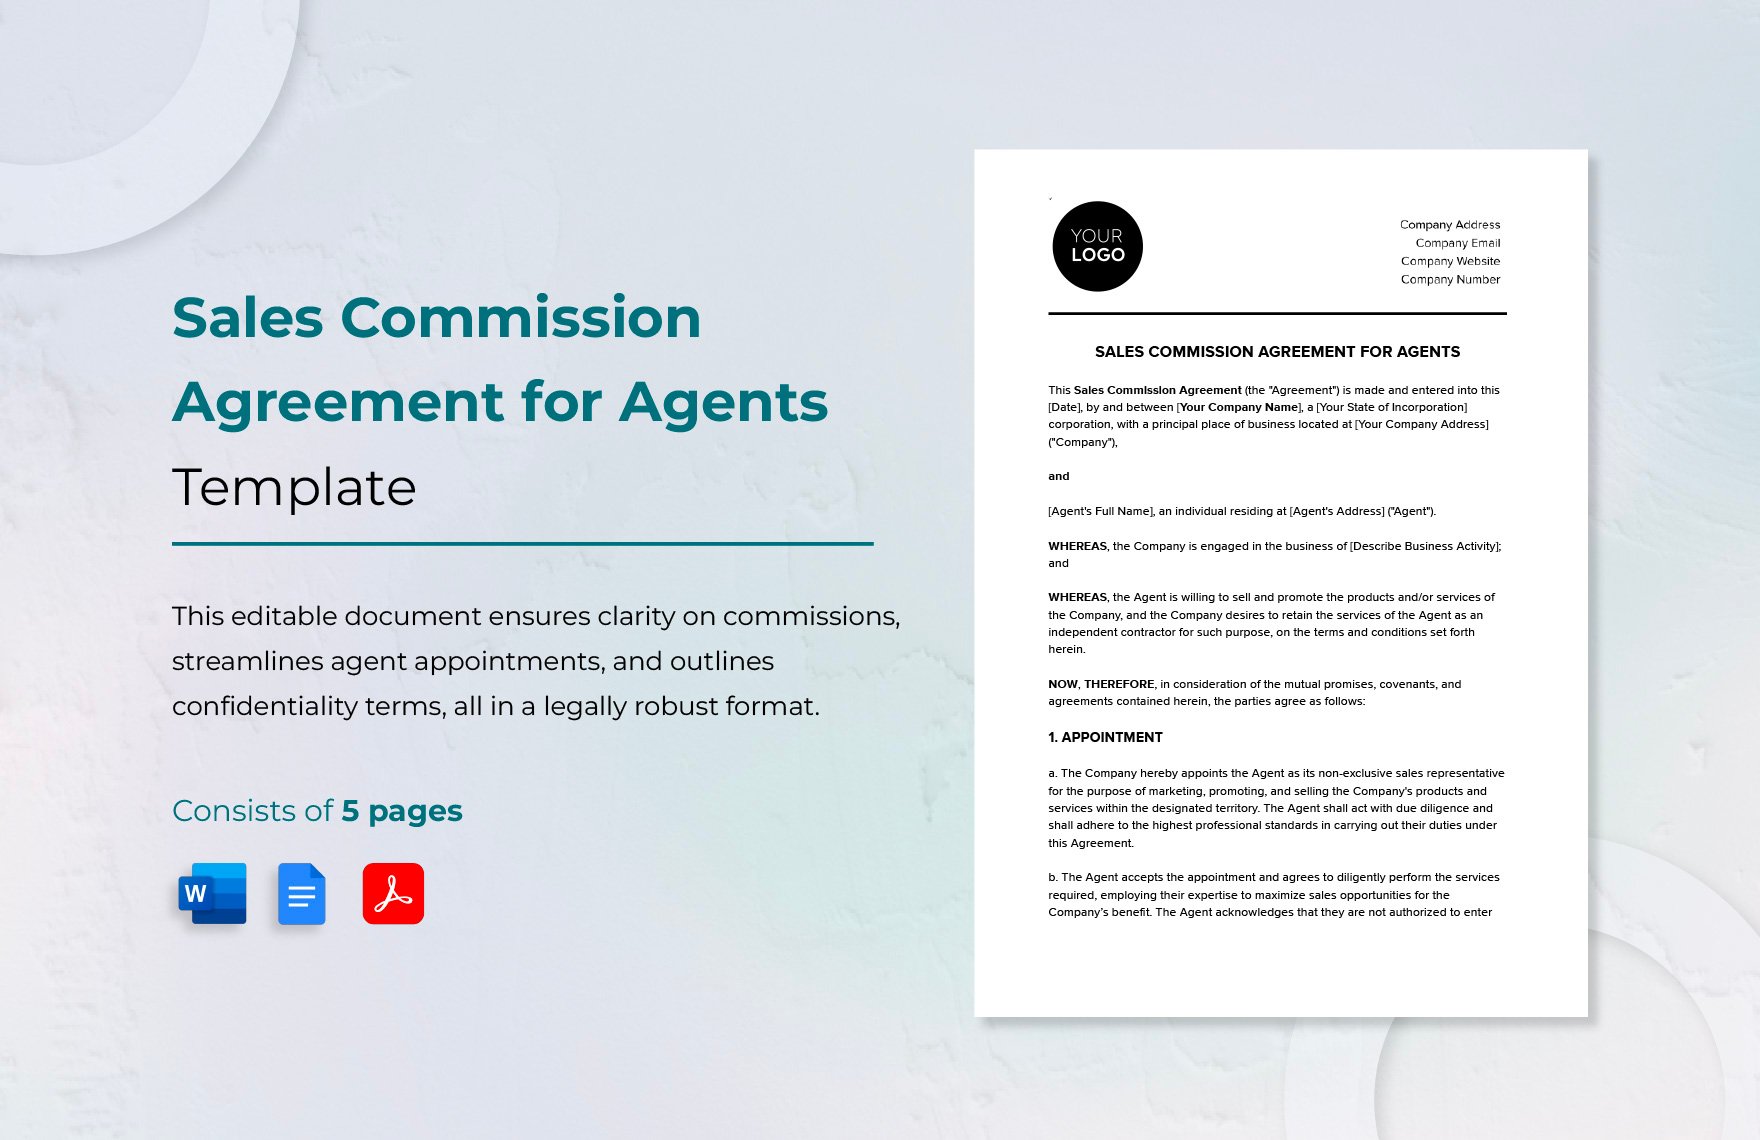 Sales Commission Agreement for Agents Template